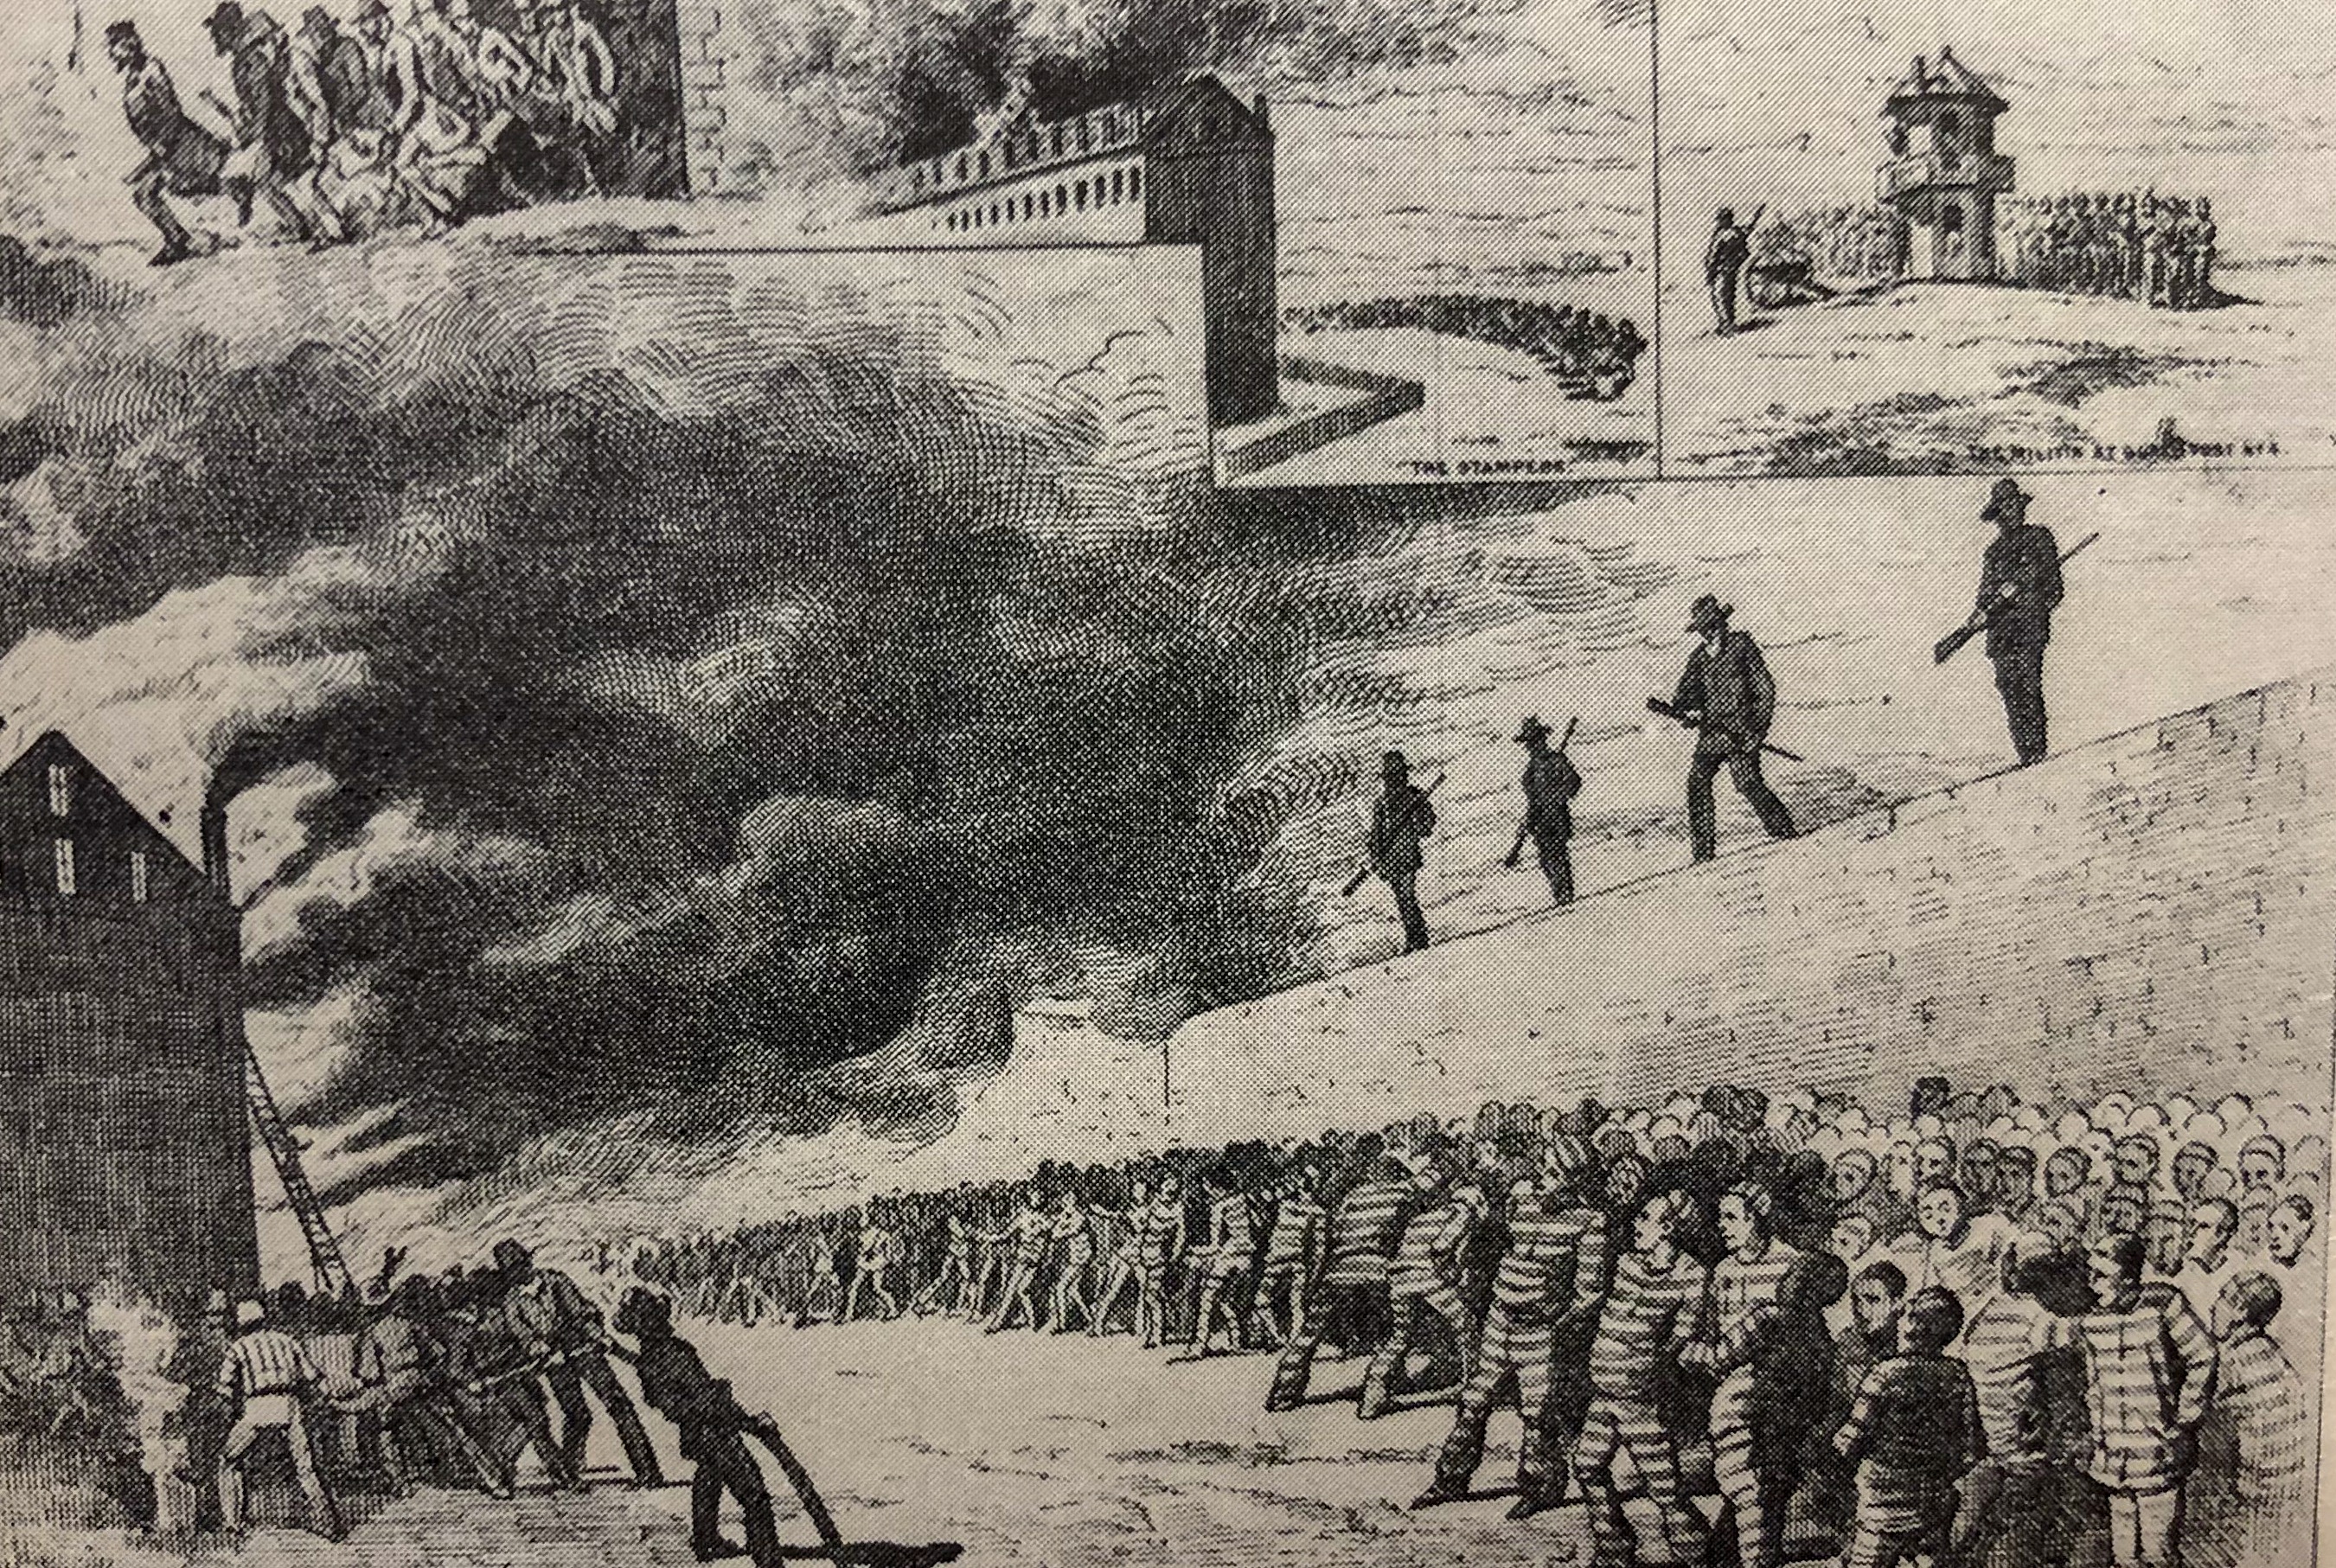 Men in uniform stand atop a wall while men in striped outfits back away from smoke.